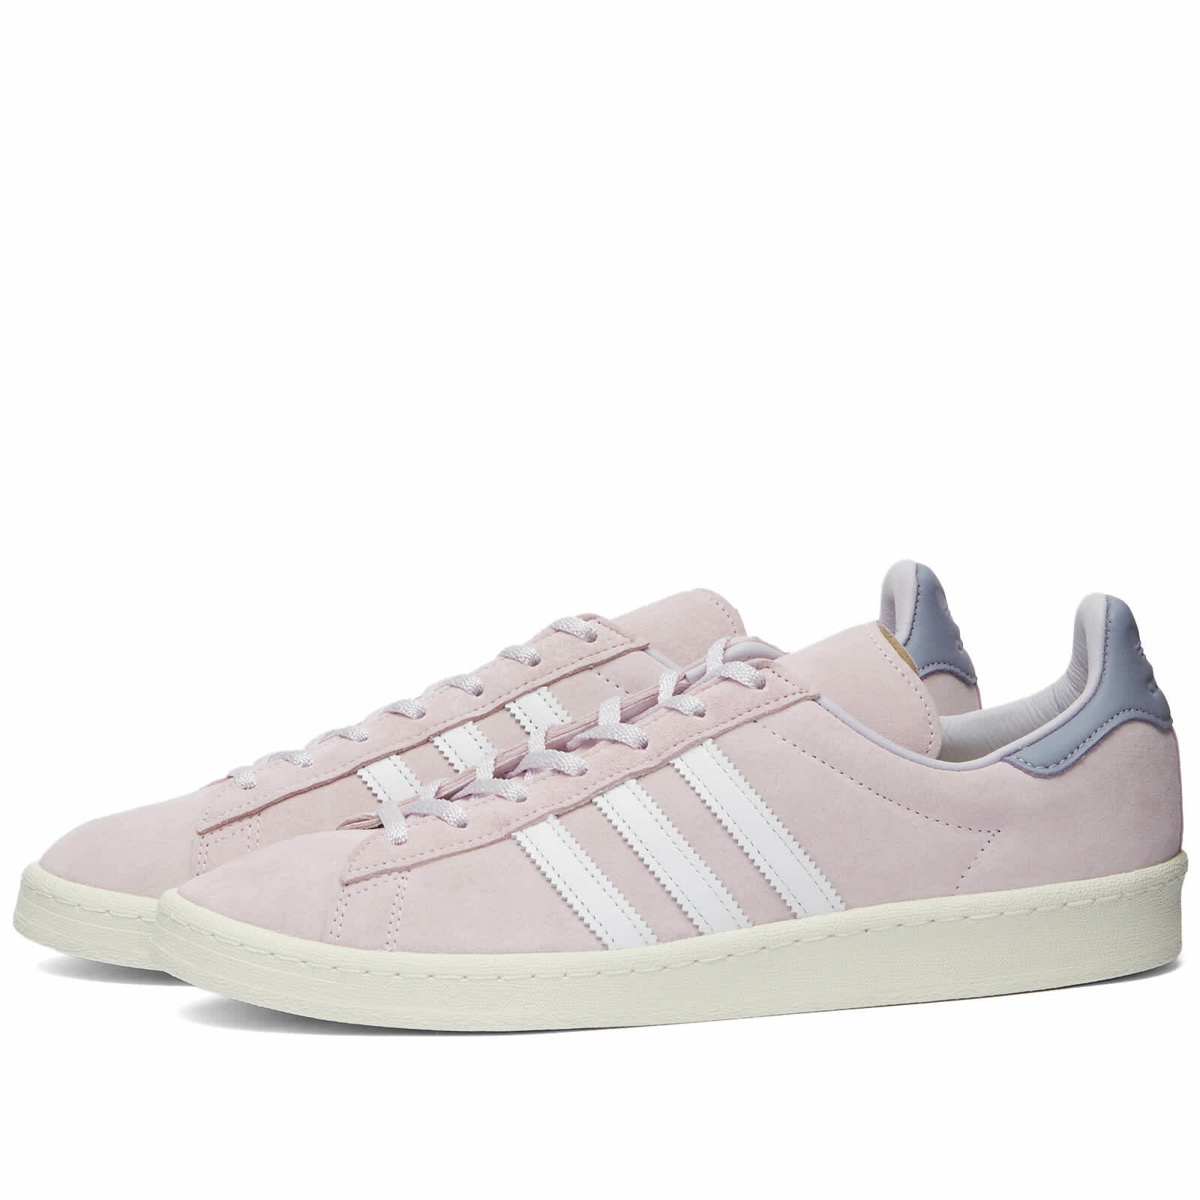 Adidas Men's Campus Sneakers in Almost Pink/White